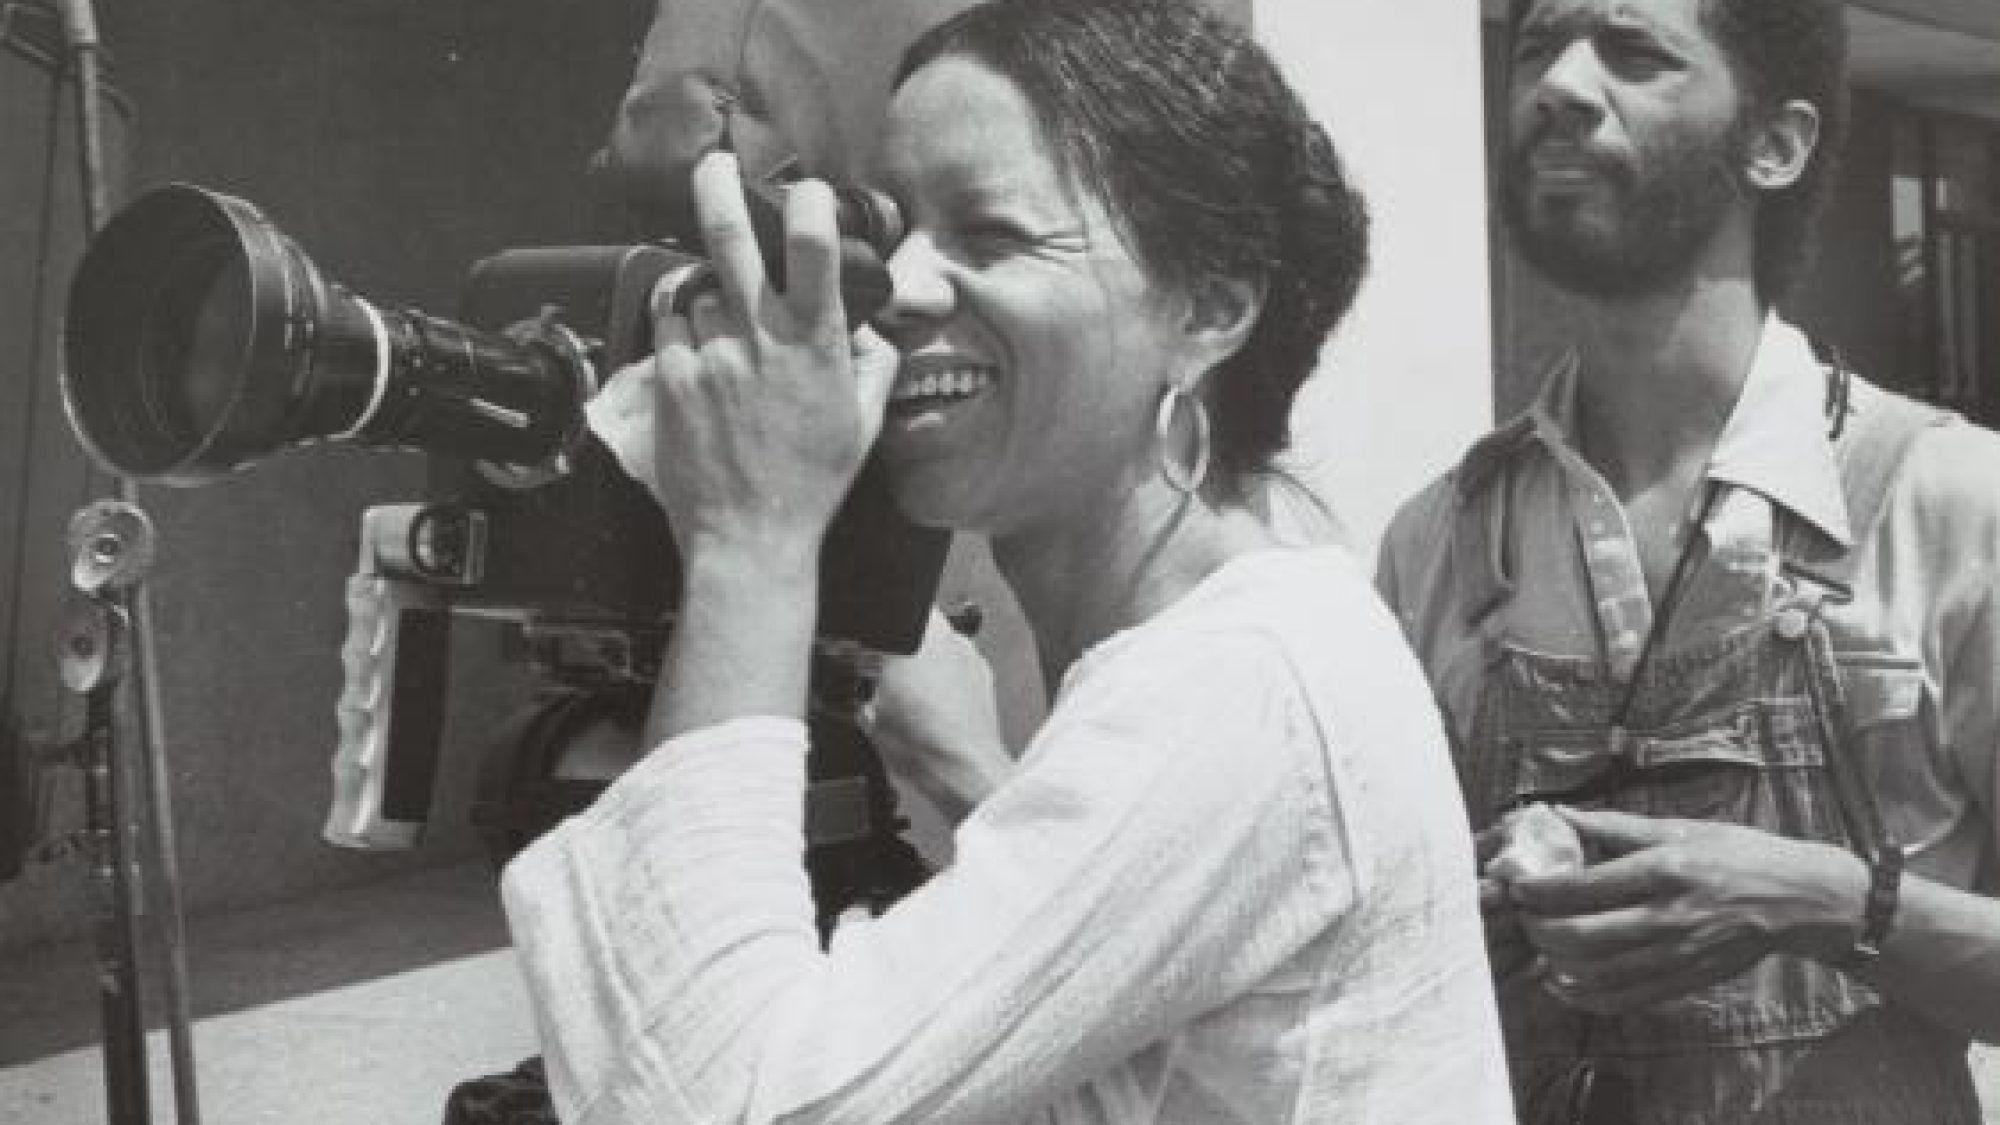 B&W photo of Kathleen Collins, a Black woman with hair tied behind a camera, one eye pressed against the objective, she is wearing a white long sleeved shirt, a Black man is standing in the background